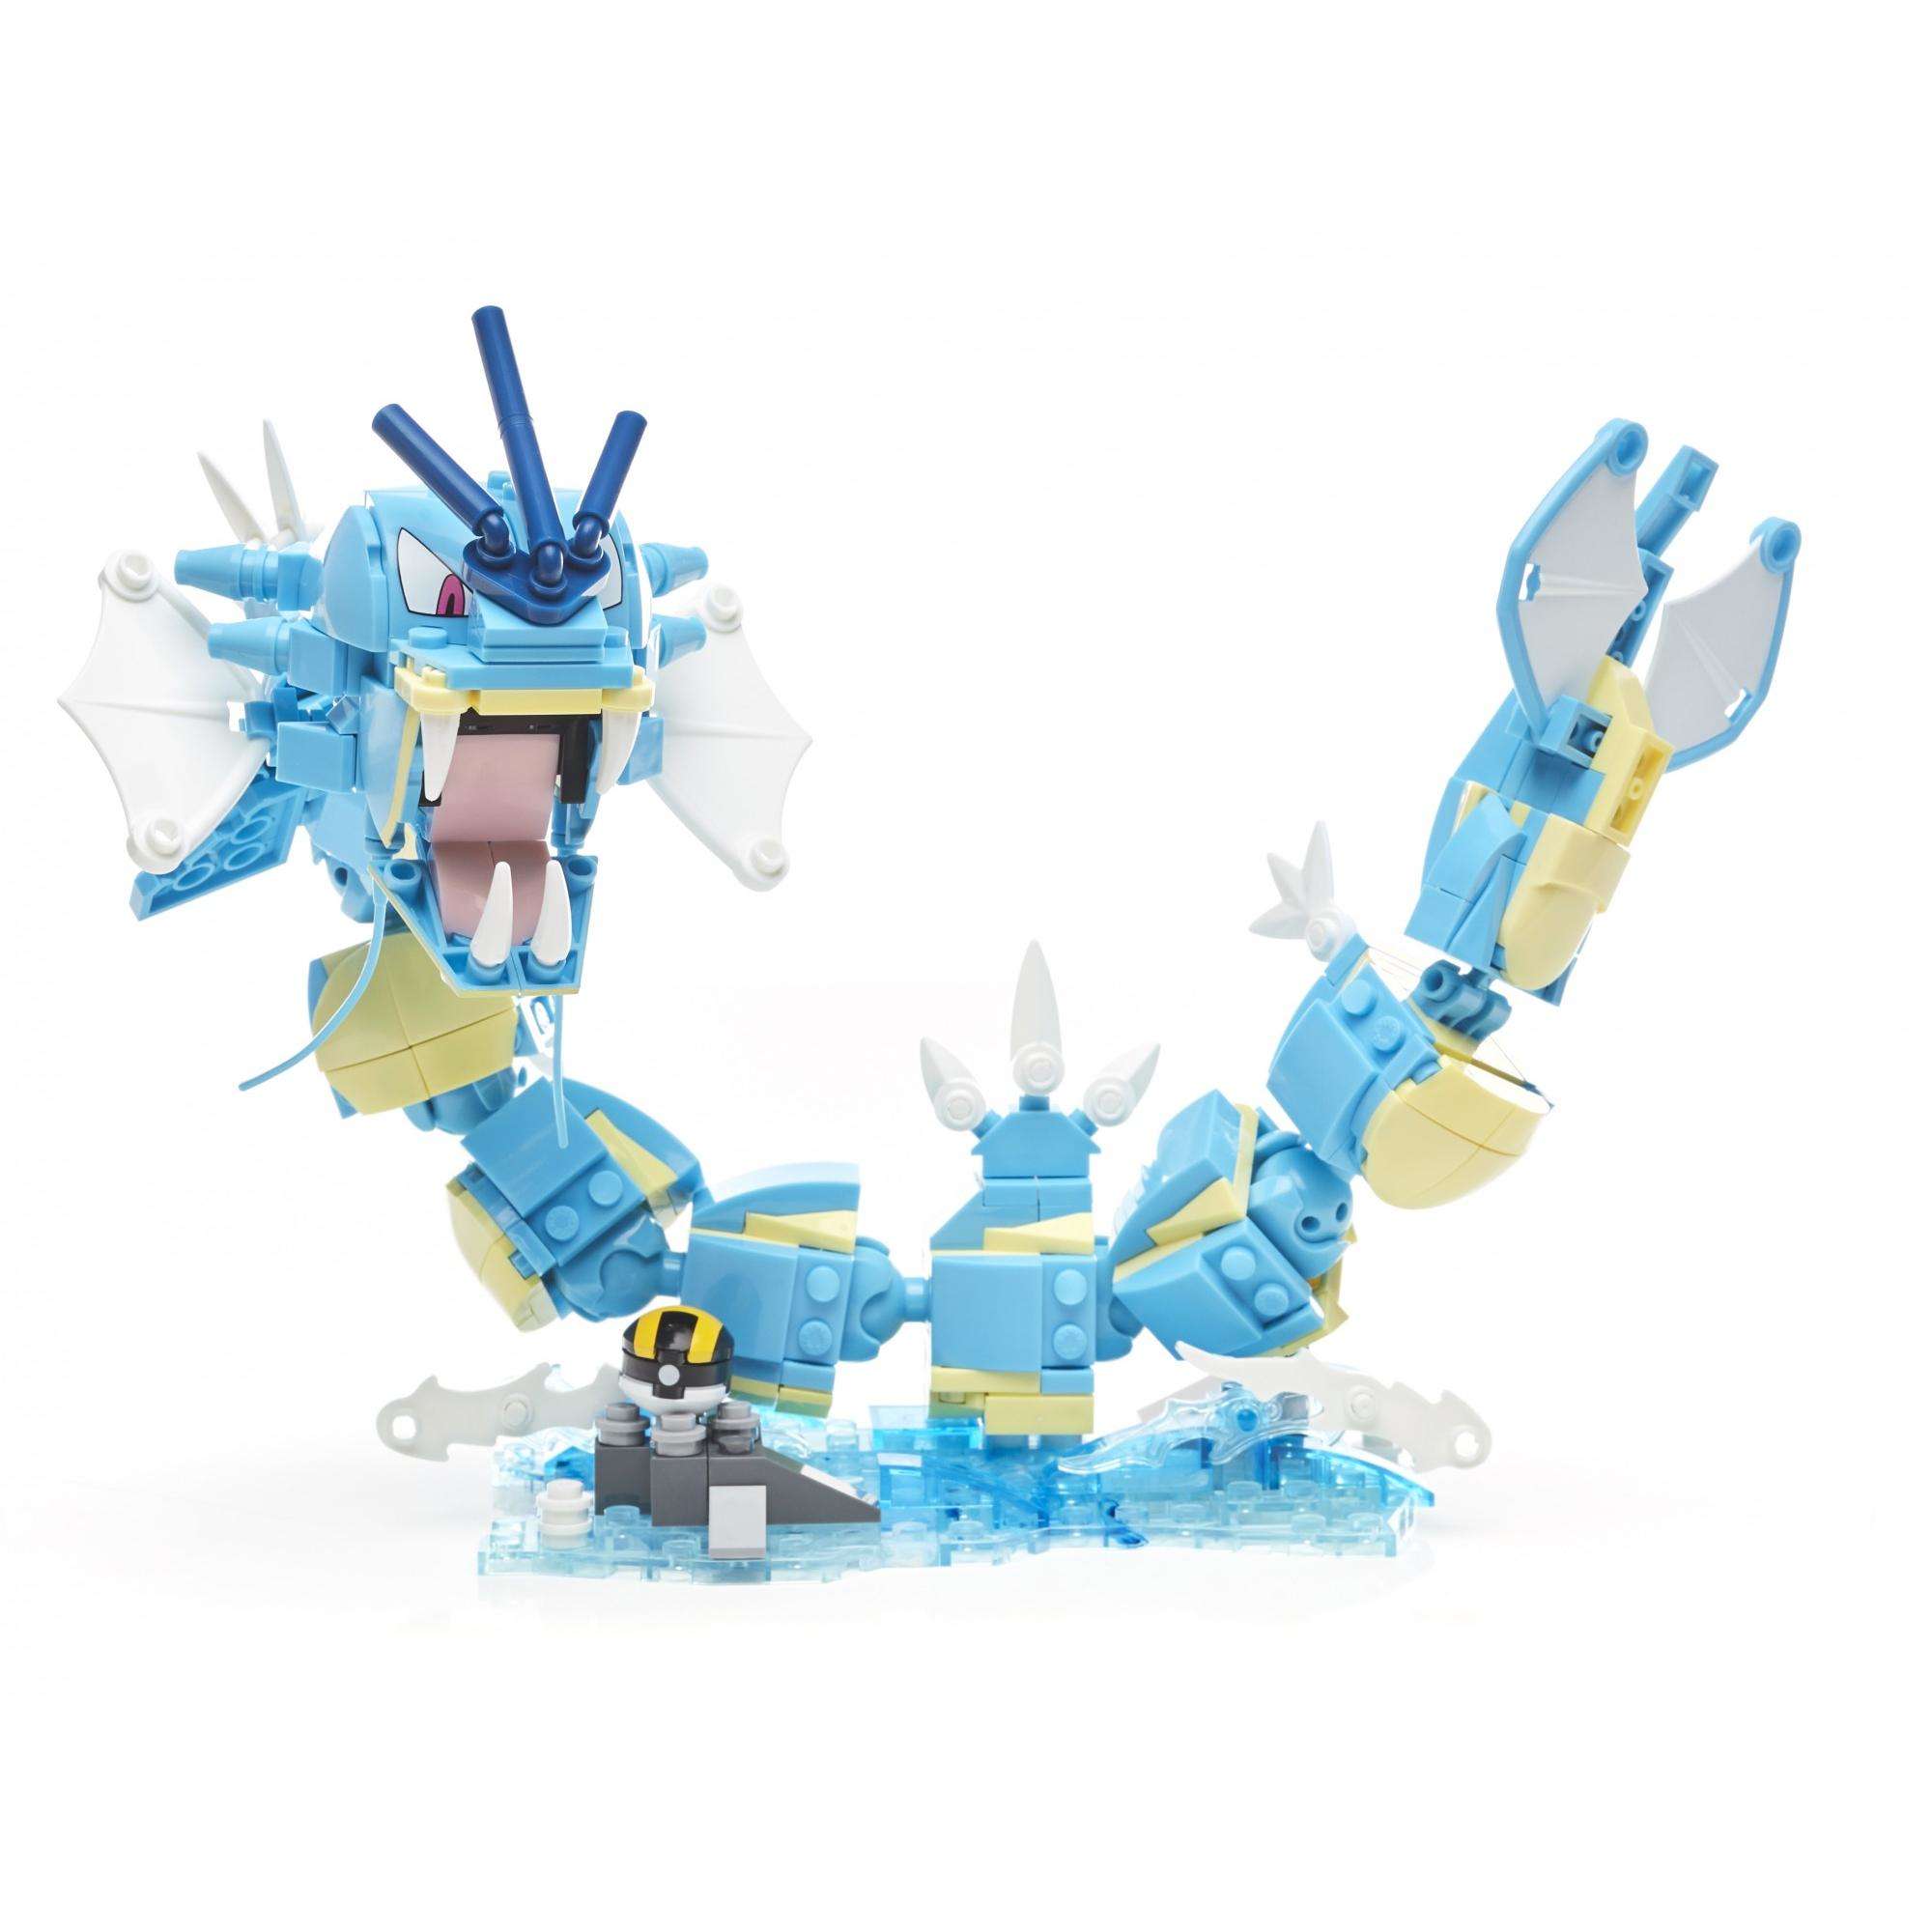 Mega Construx Pokemon Gyarados Construction Set with character figures,  Building Toys for Kids (352 Pieces)